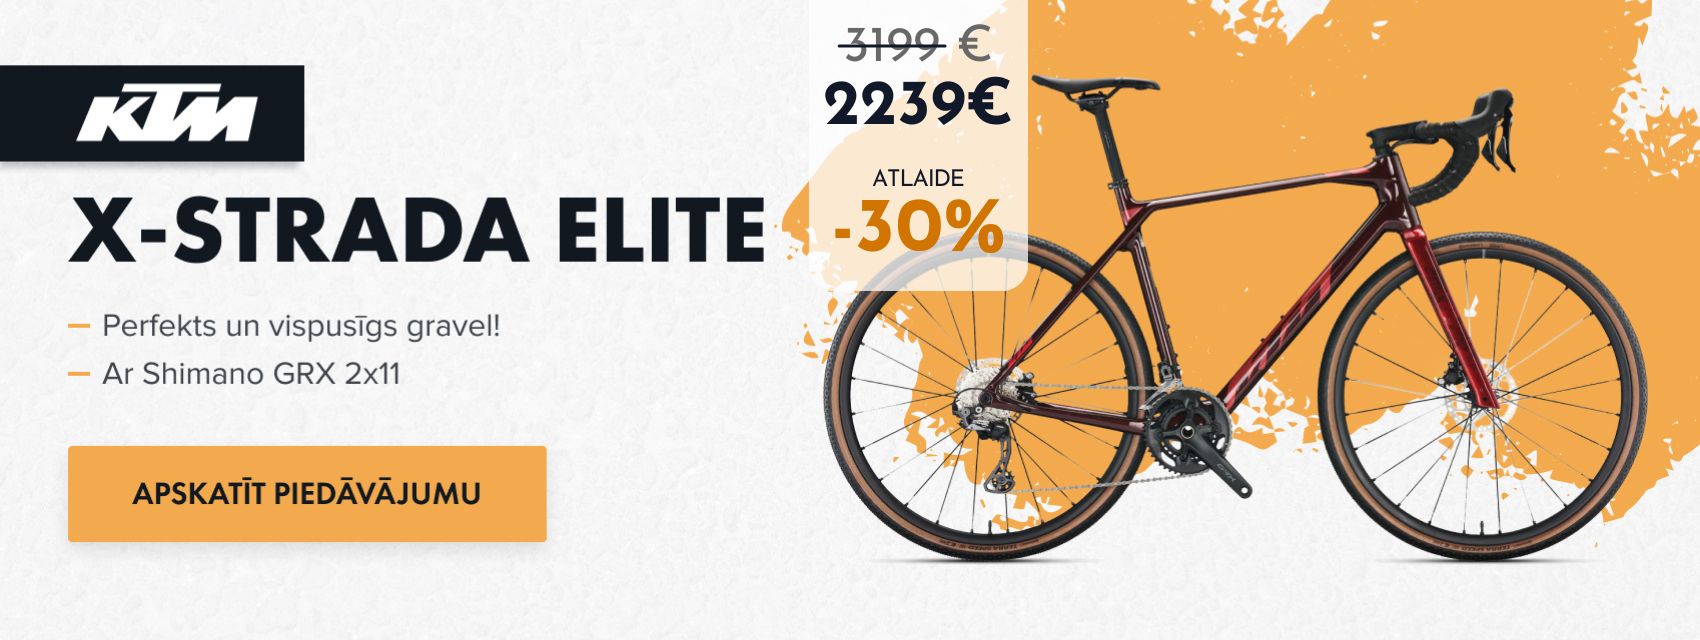 AstraVelo special offer